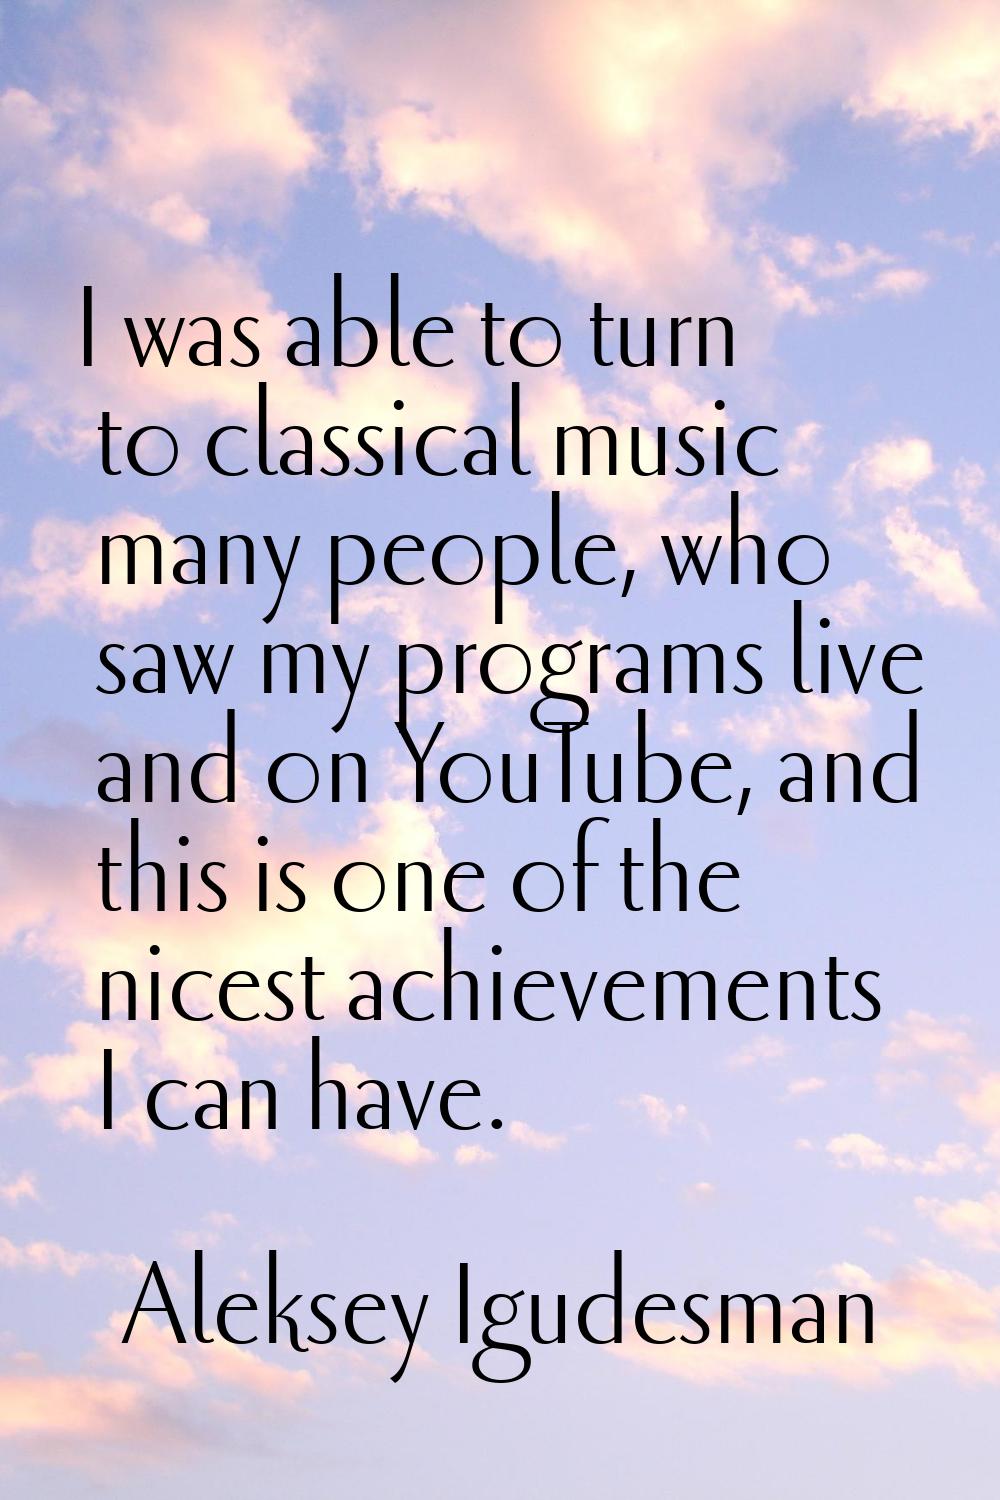 I was able to turn to classical music many people, who saw my programs live and on YouTube, and thi